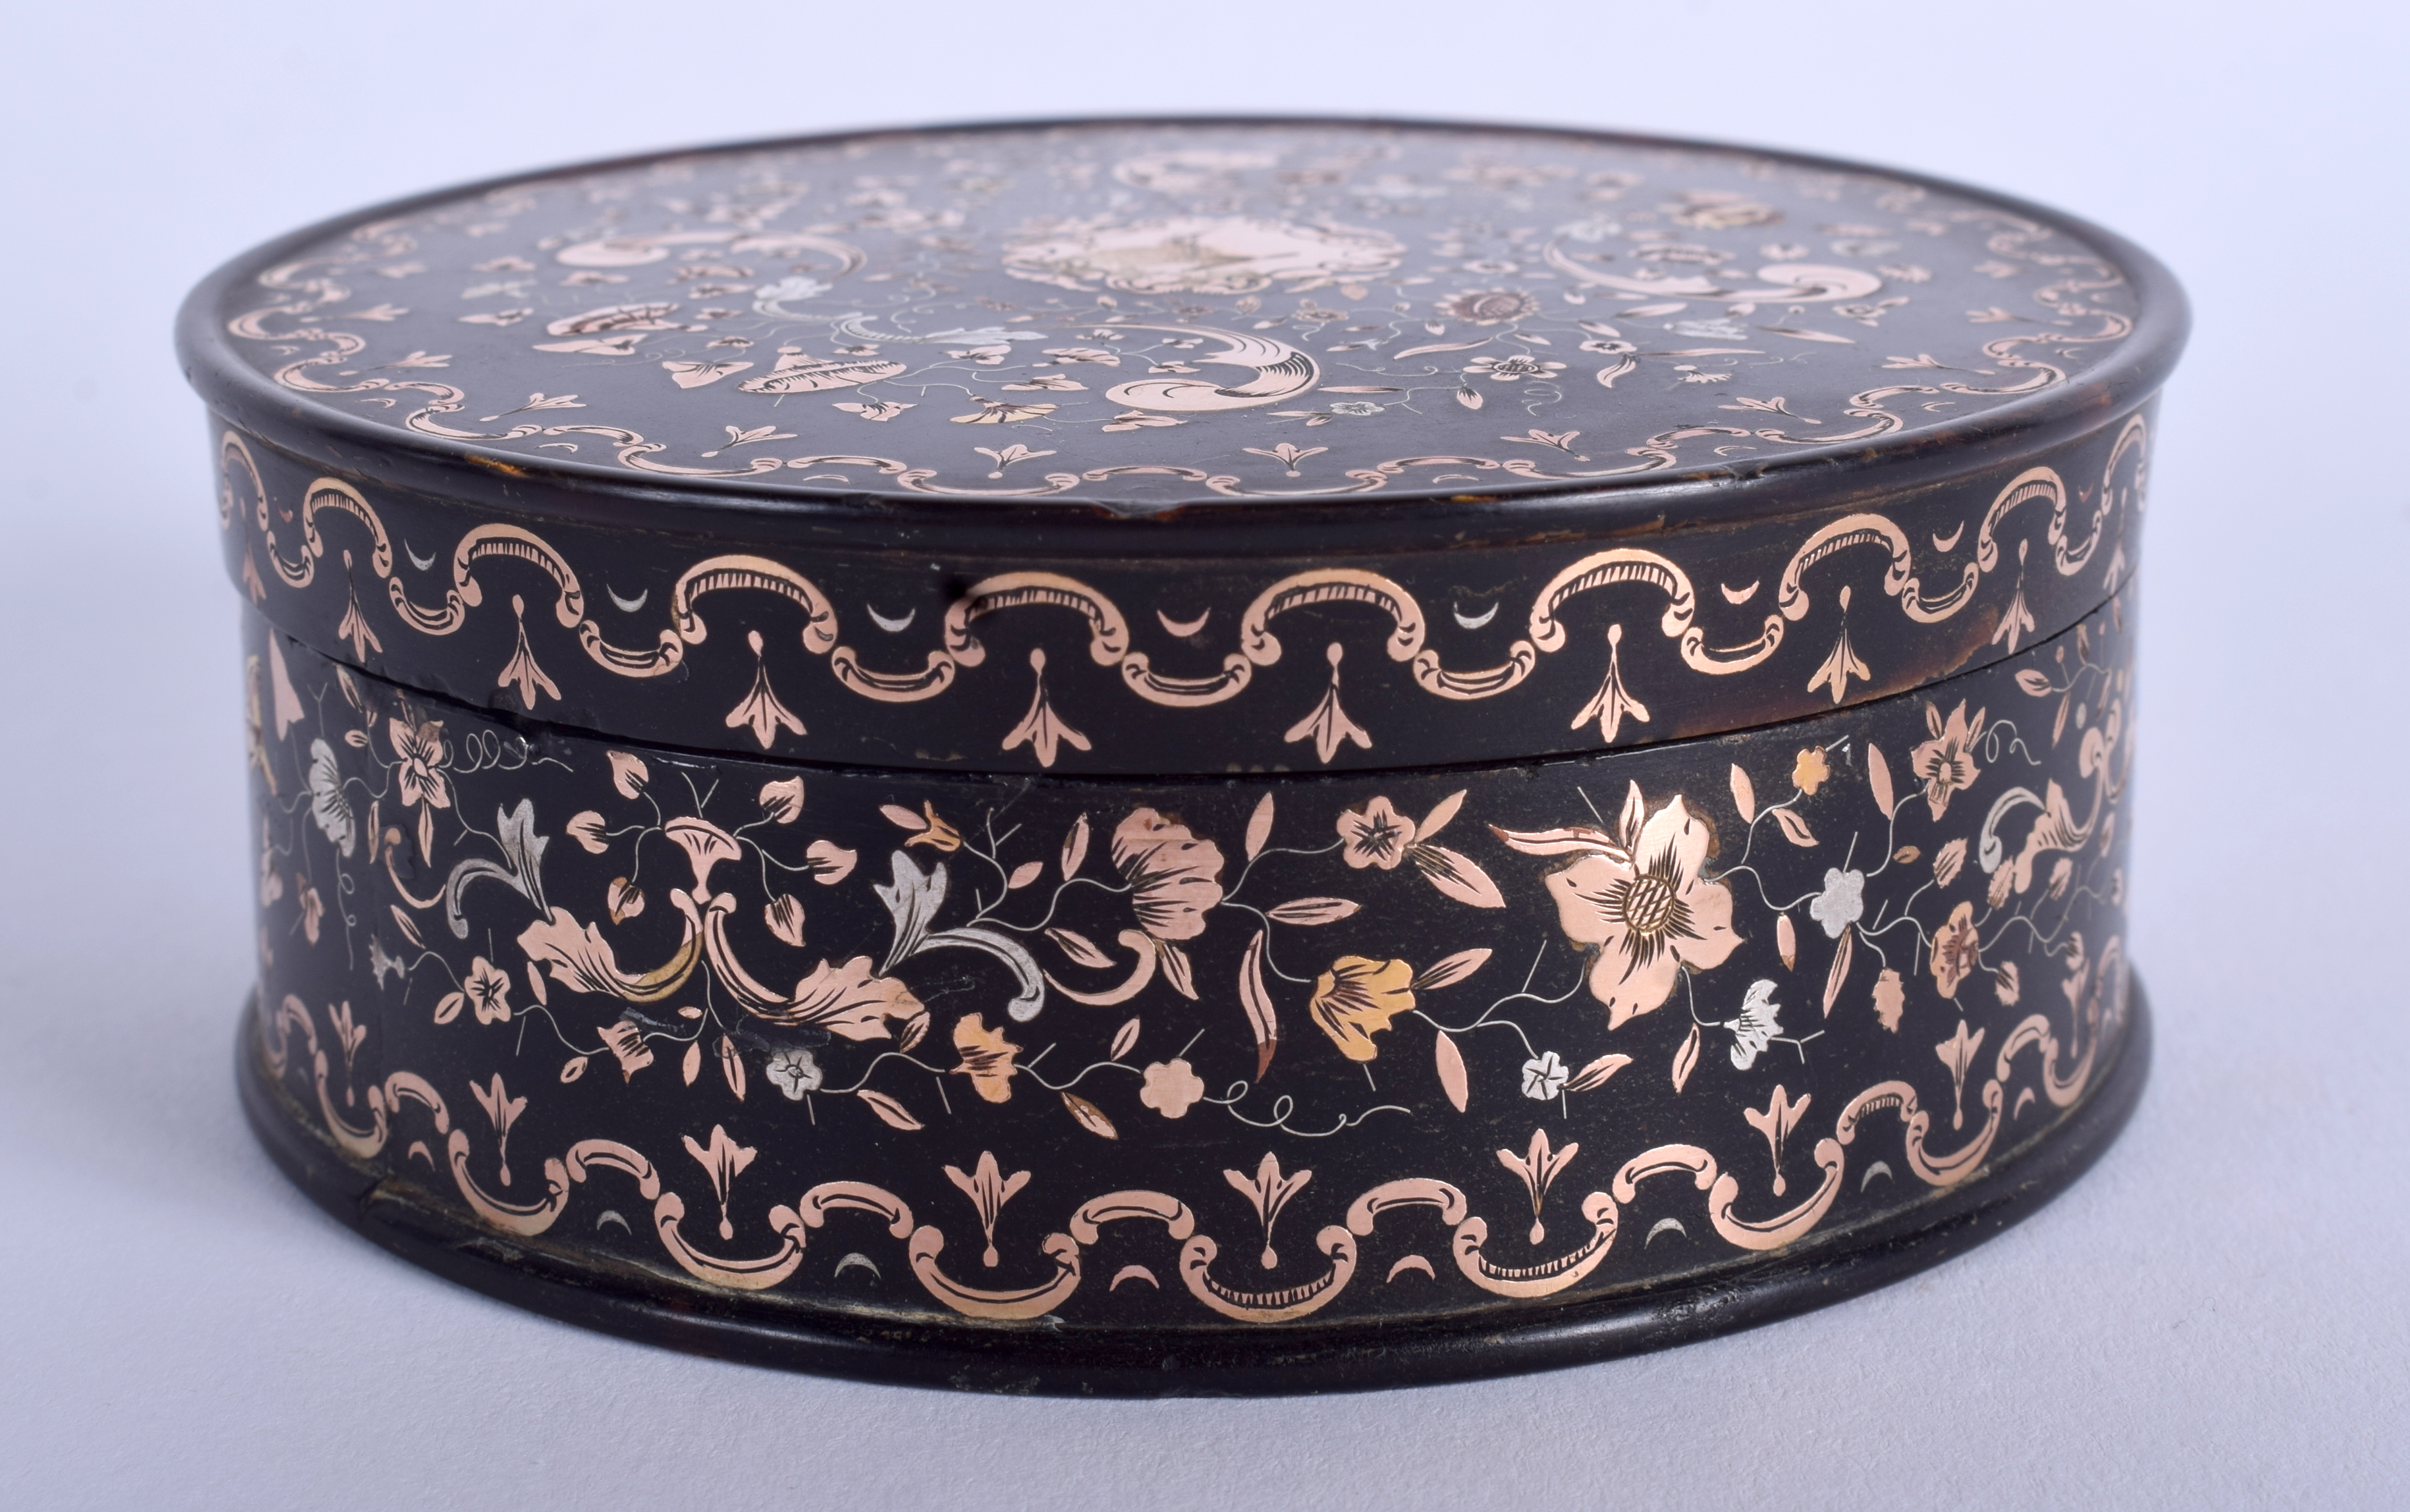 A GOOD GEORGEIII GOLD INLAID PIQUE WORK TORTOISESHELL BOX AND COVER decorated with foliage. 9 cm x - Image 3 of 5